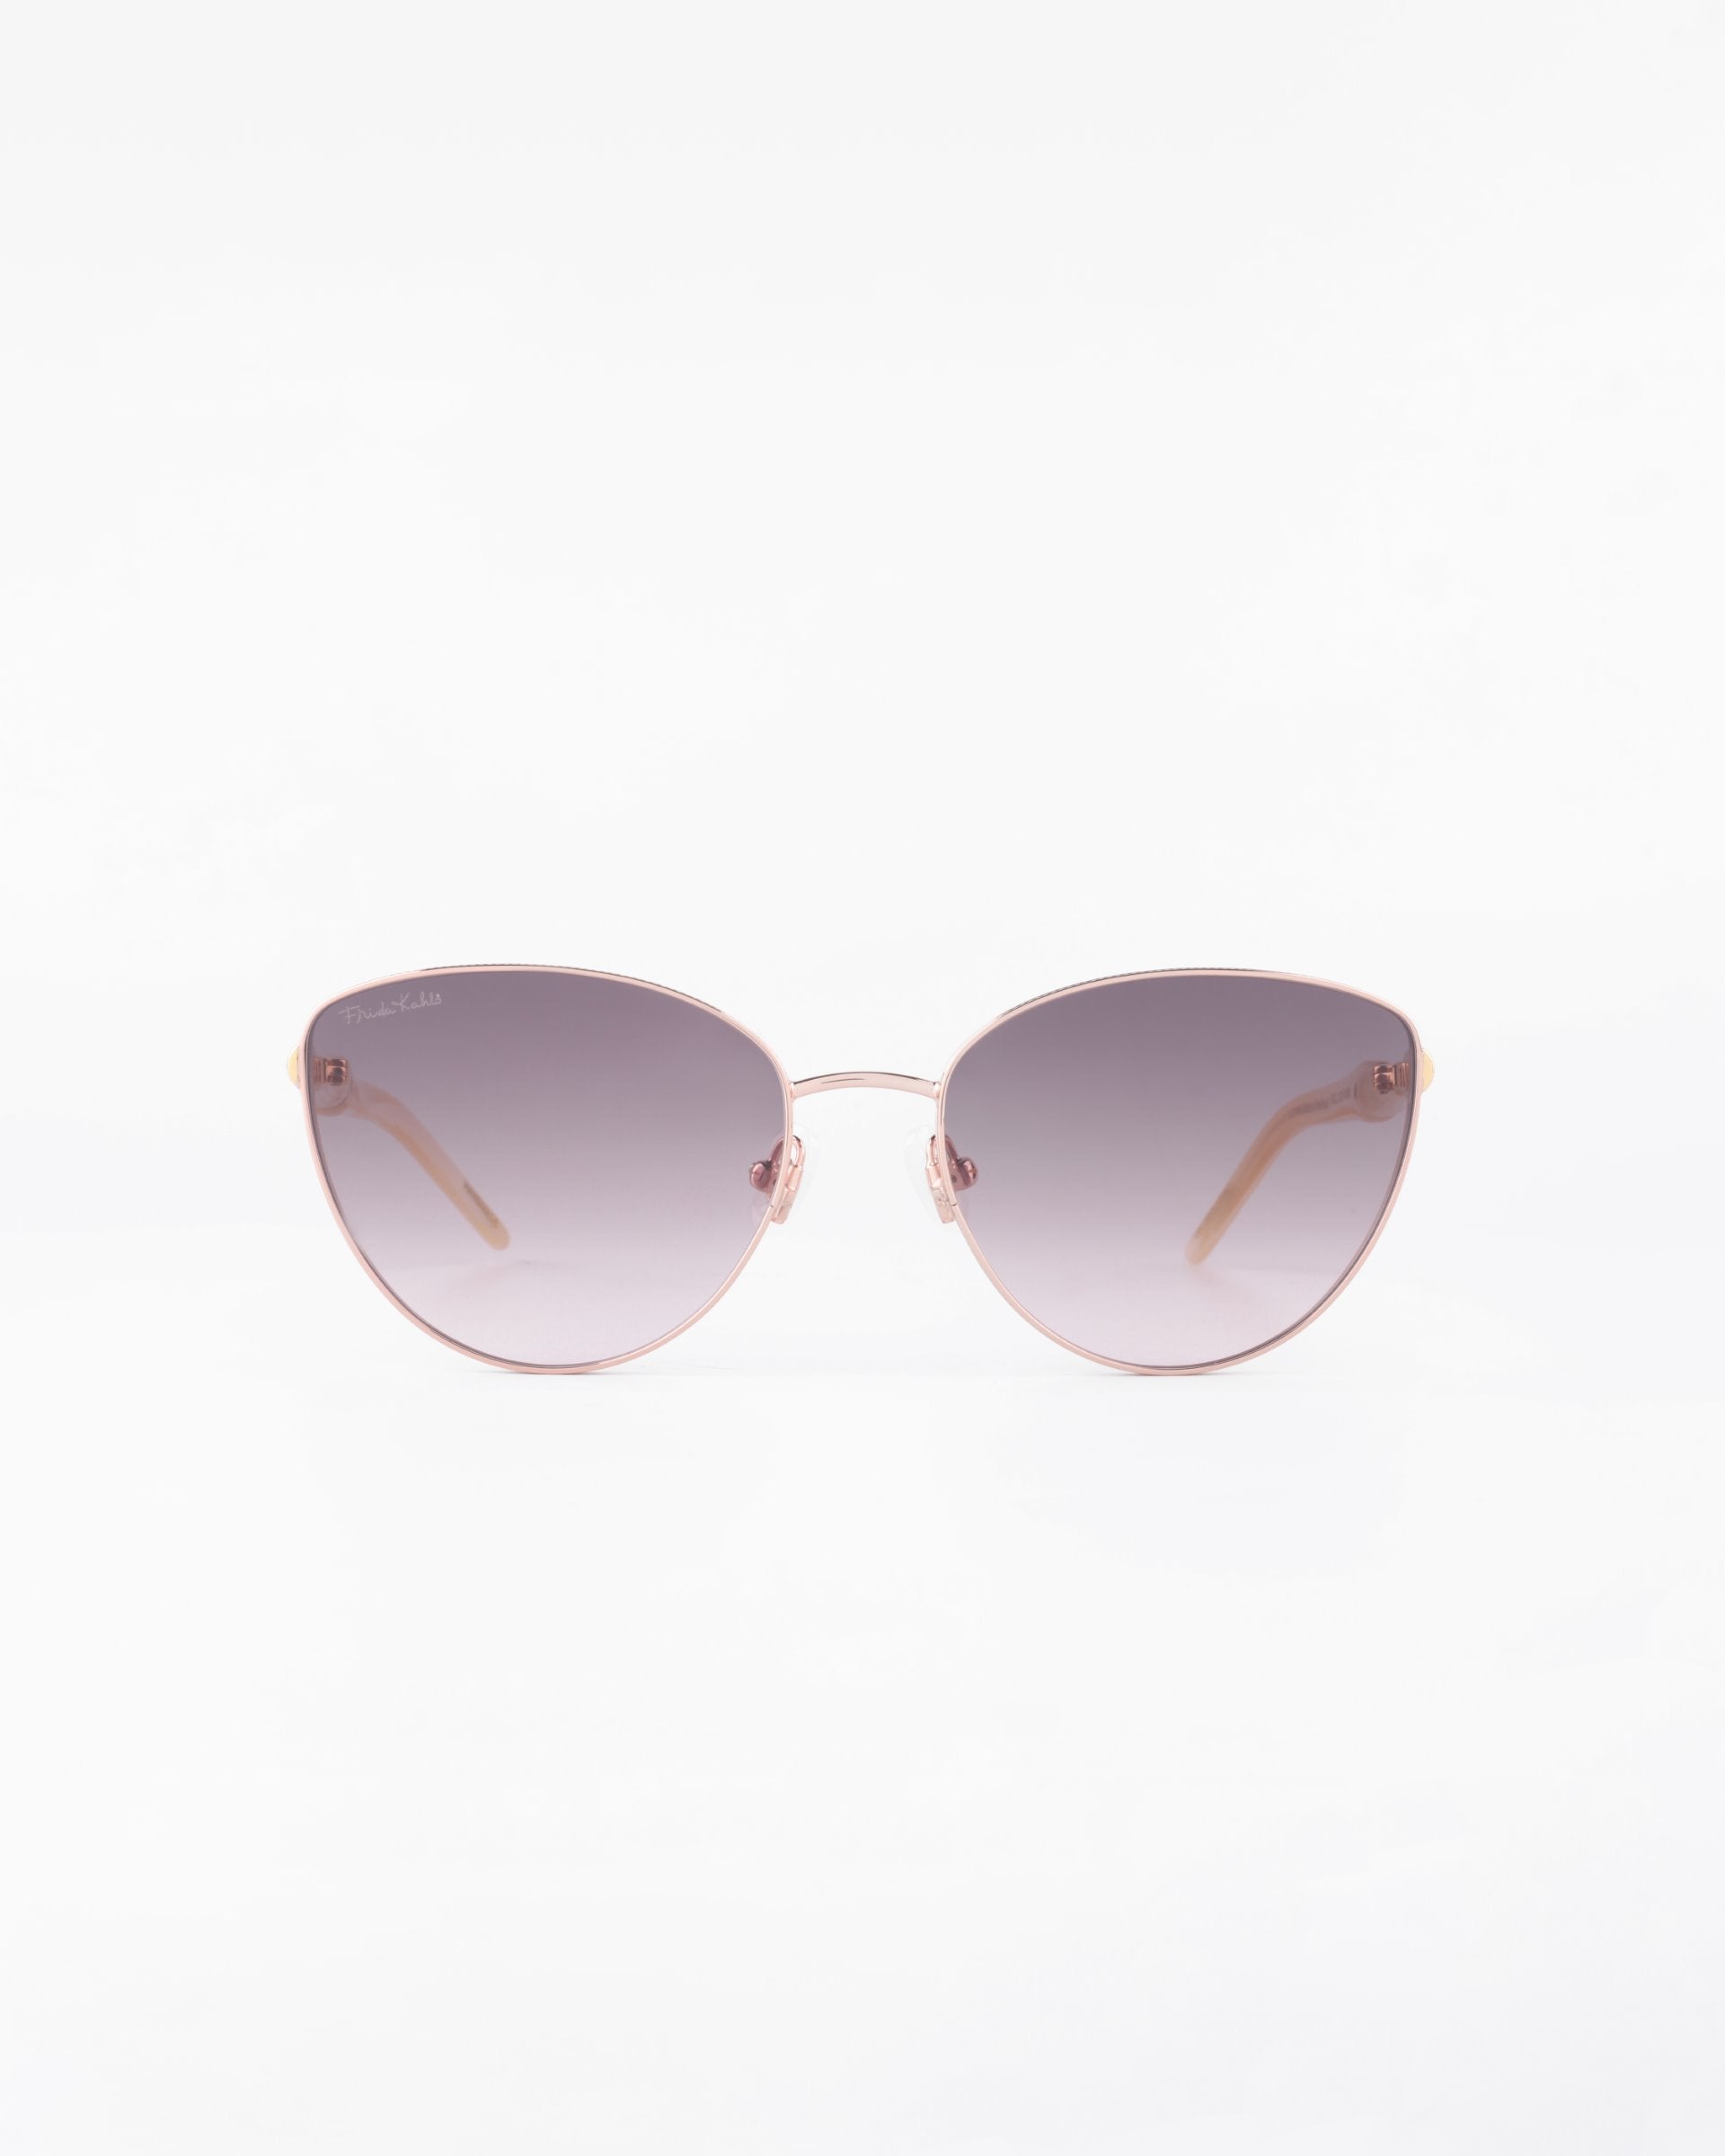 A pair of stylish Frida Brush sunglasses by For Art&#39;s Sake® with rose-gold frames and dark gradient, ultra-lightweight lenses. The arms, crafted from gold-plated stainless steel, are thin and elegant. Featuring UVA &amp; UVB protection, these Frida Brush sunglasses create a modern look against a white background.